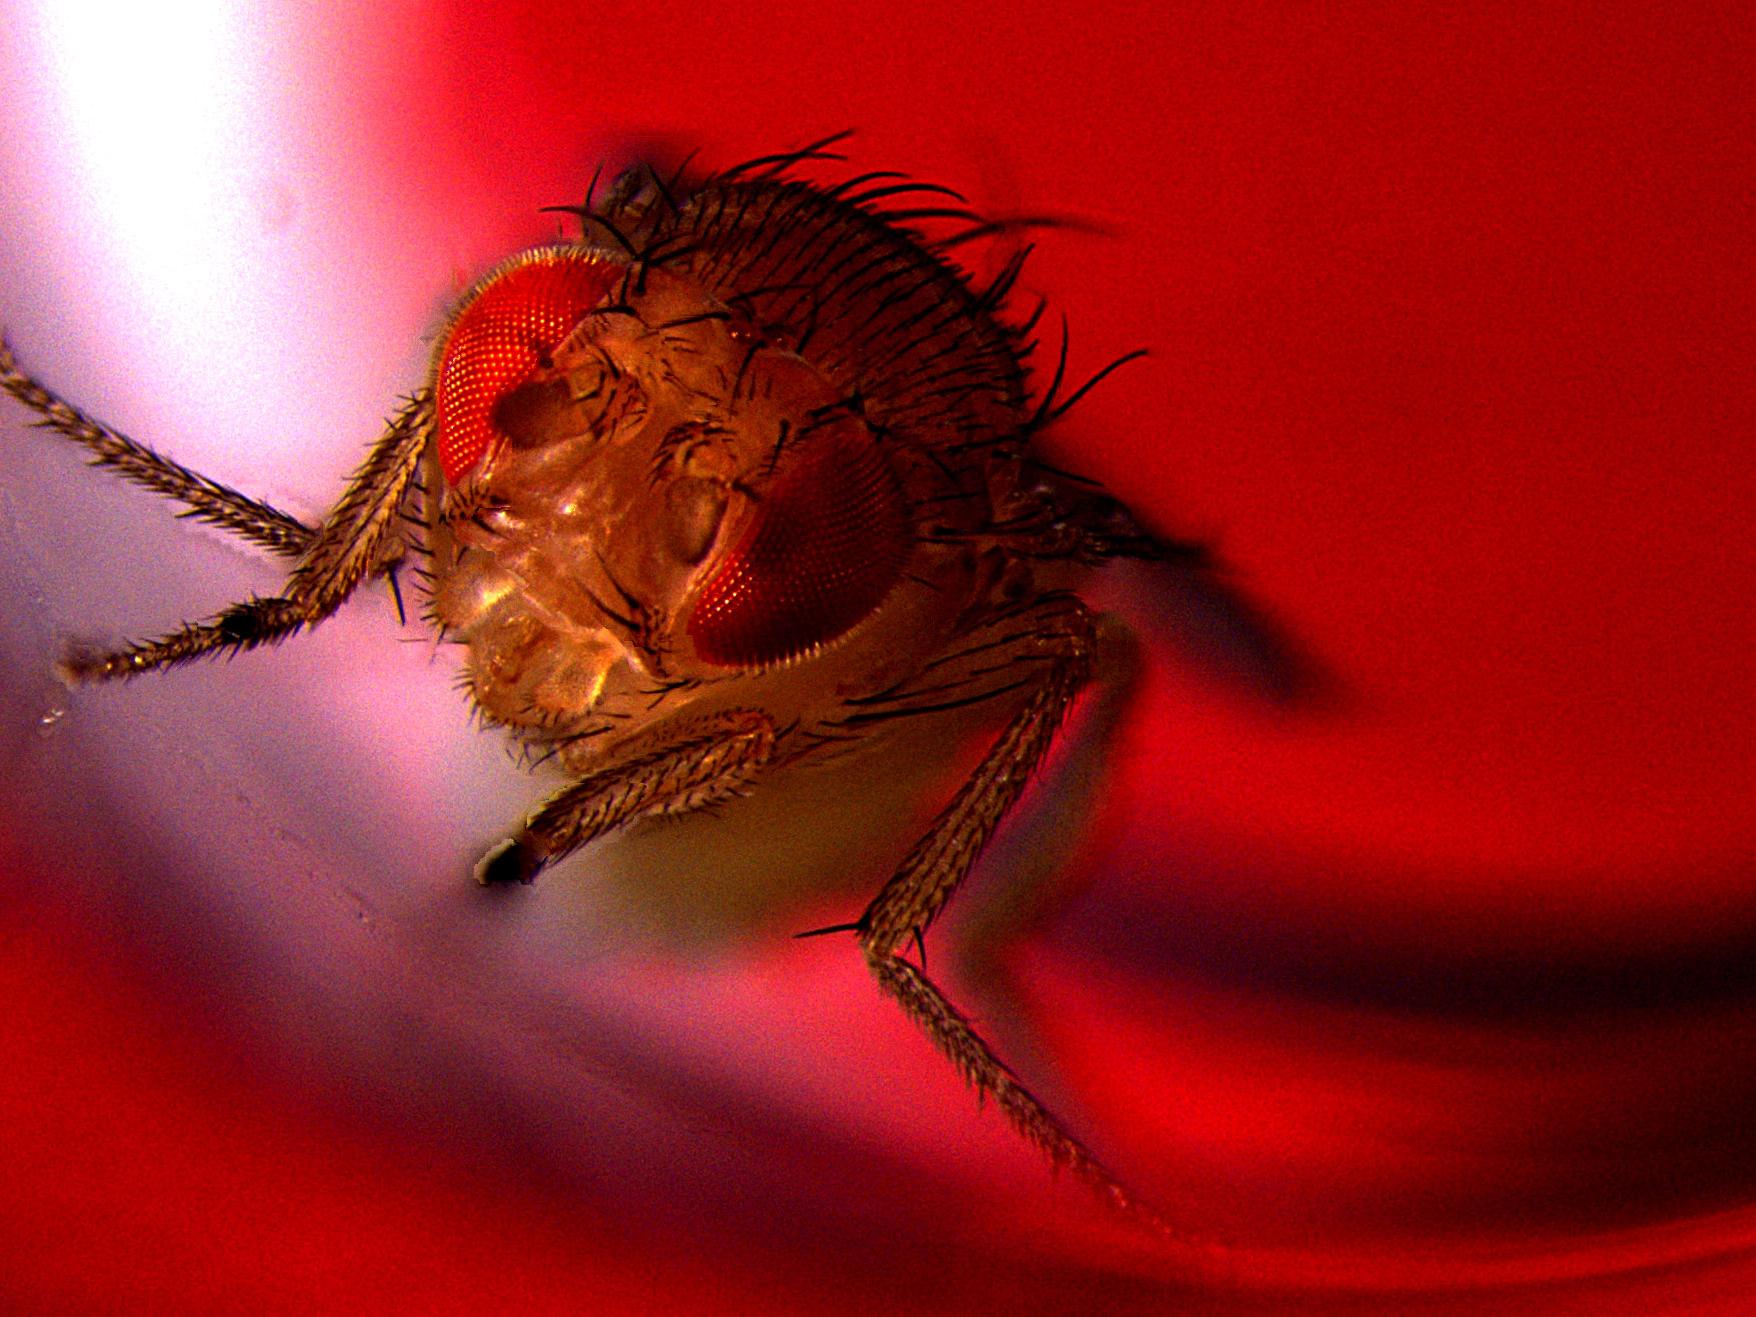 Red light district: male fruit flies were genetically engineered to ejaculate when exposed to red lights